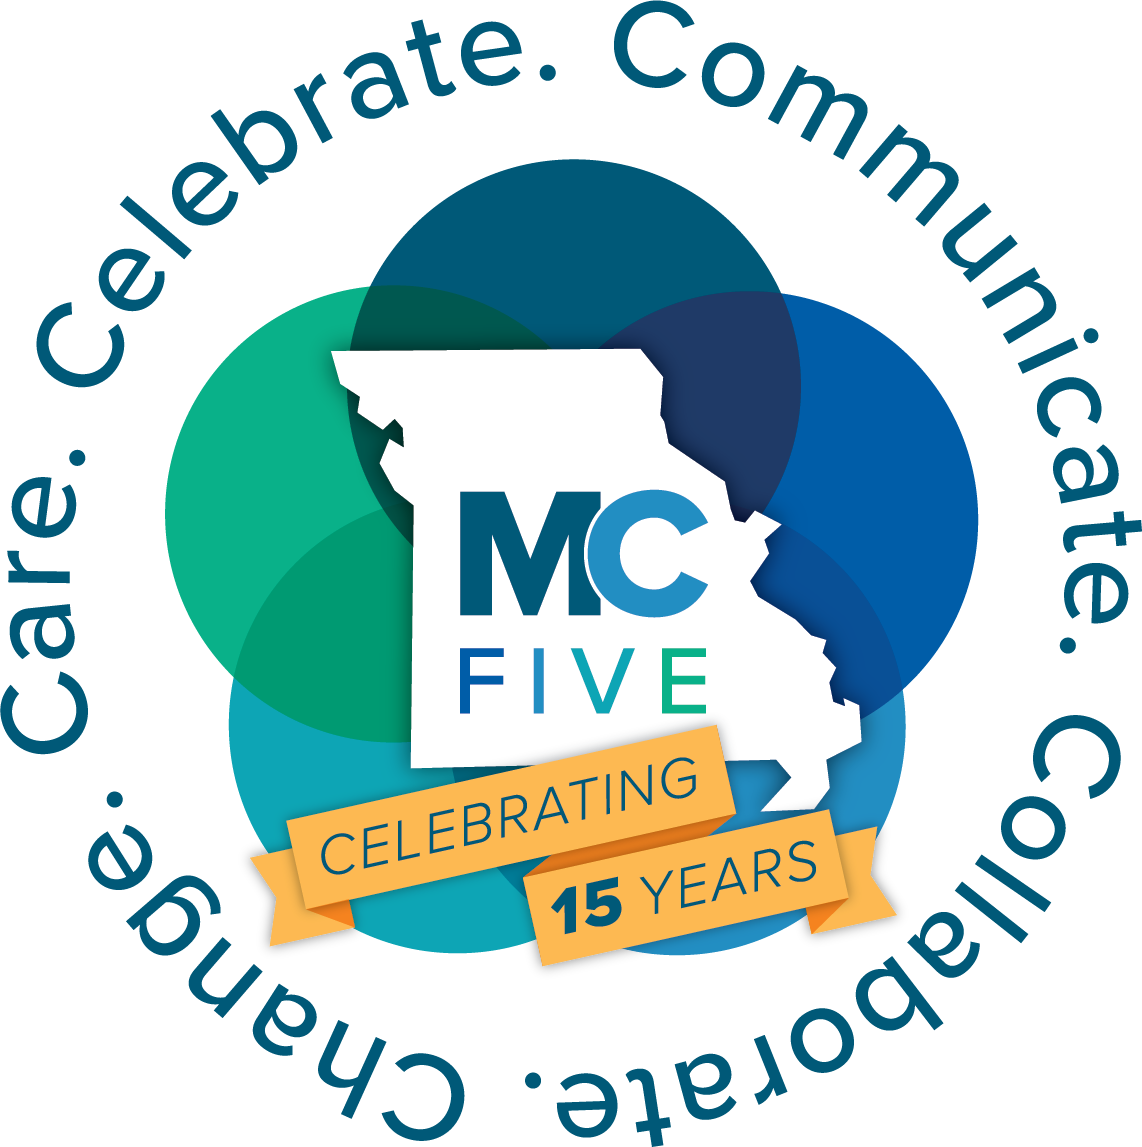 MC5 / Changing the culture of adult care across Missouri